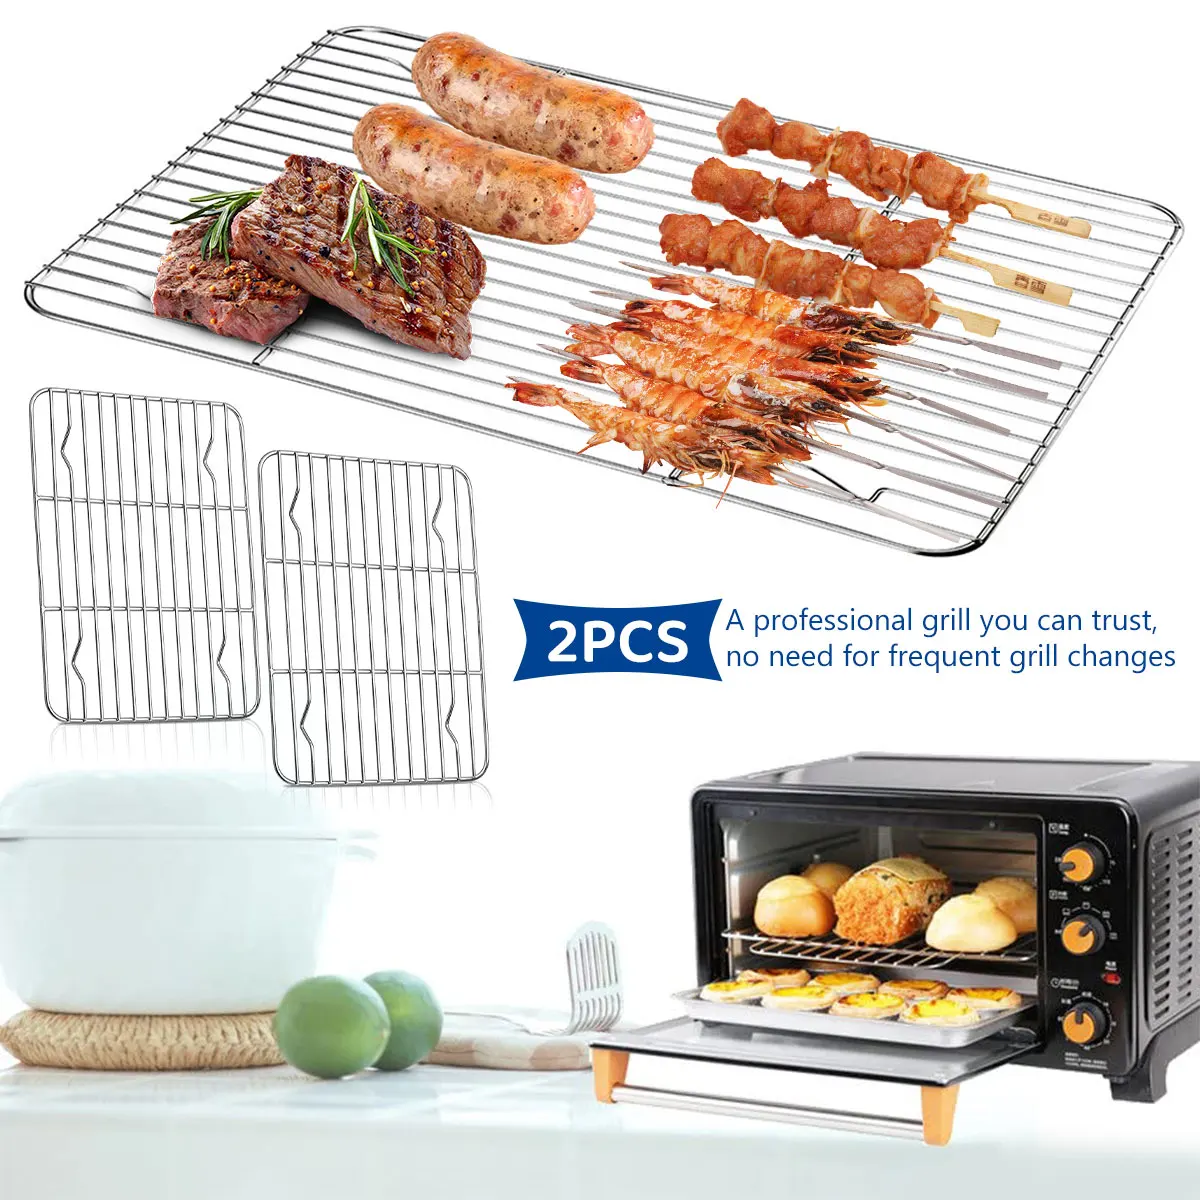 https://ae01.alicdn.com/kf/Sec5131121de24cc8bcb3ff51af0c29ceF/2pcs-Stainless-Steel-Roasting-Rack-Baking-Pans-Non-stick-Oven-Grill-Racks-Barbecue-Cooking-Tool-Bread.jpg